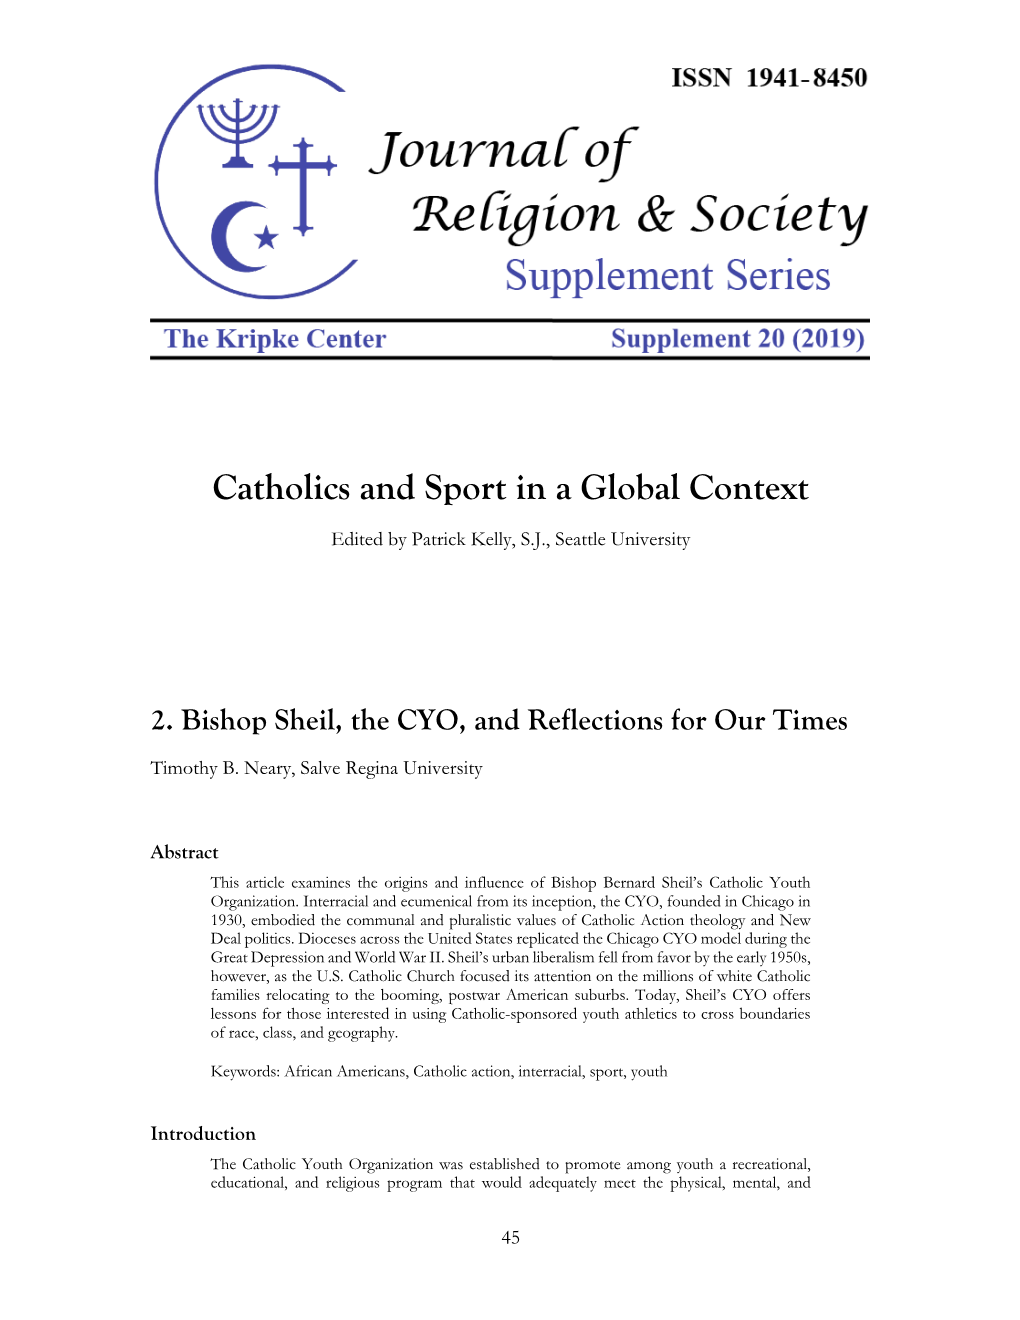 Catholics and Sport in a Global Context